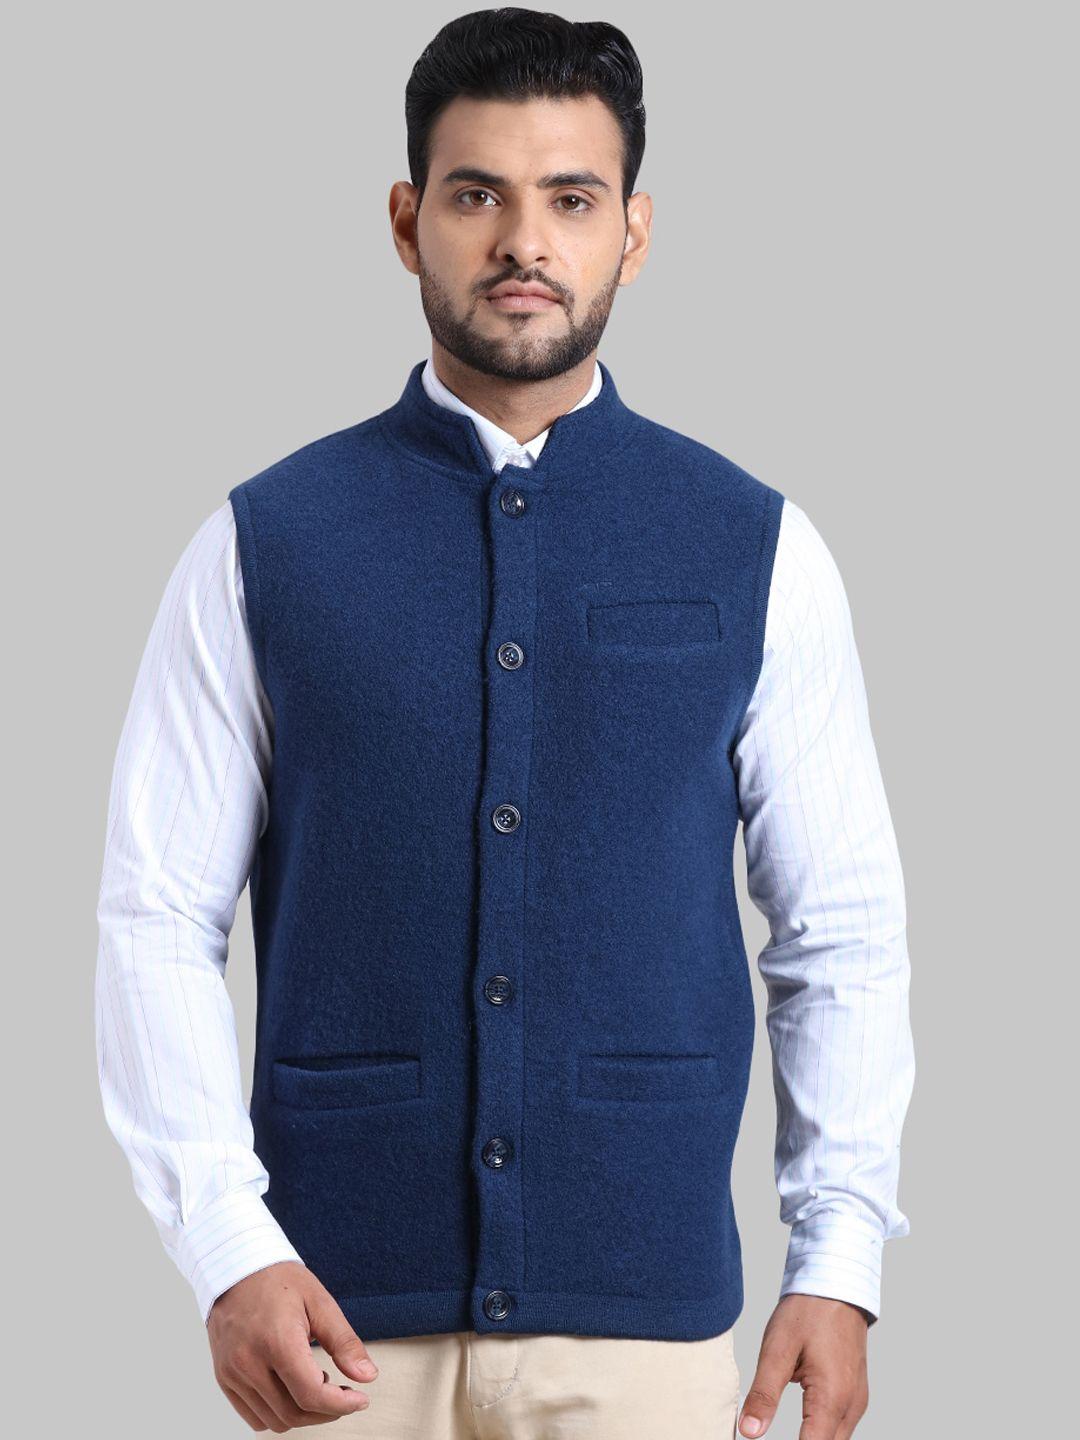 colorplus-men-navy-blue-solid-sleeveless-tailored-jacket